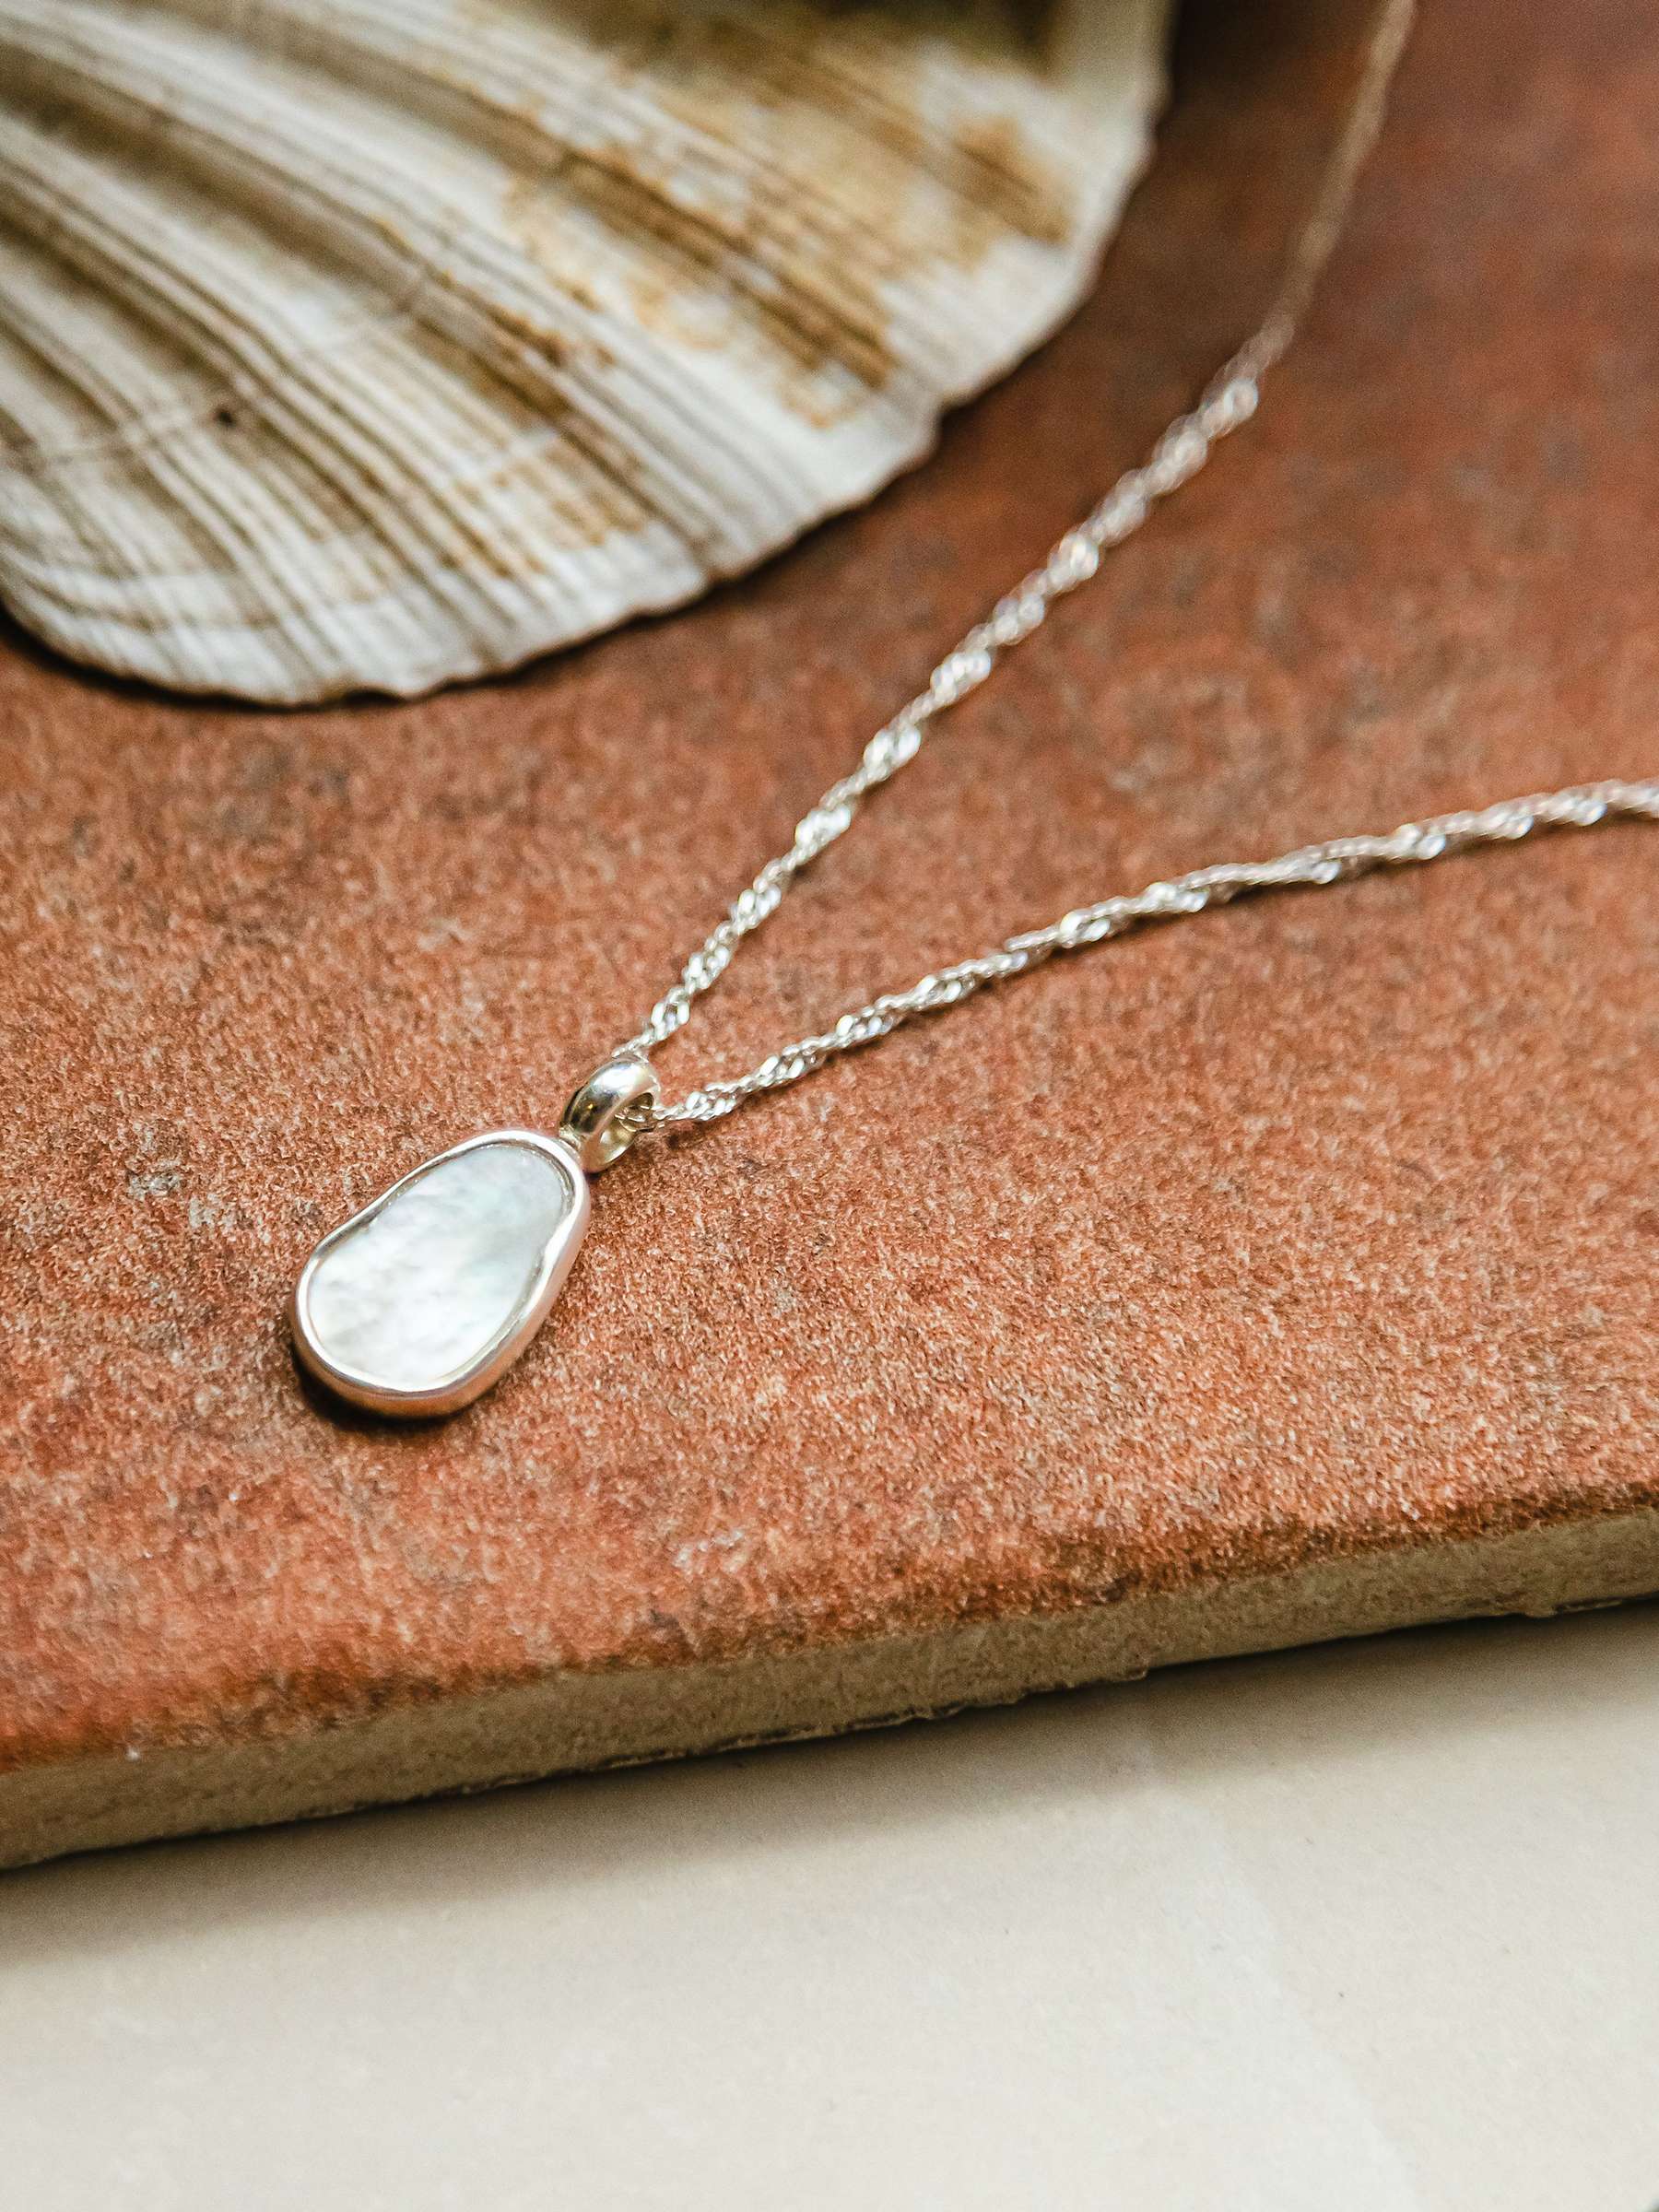 Buy Daisy London Mother of Pearl Pendant Necklace, Silver Online at johnlewis.com